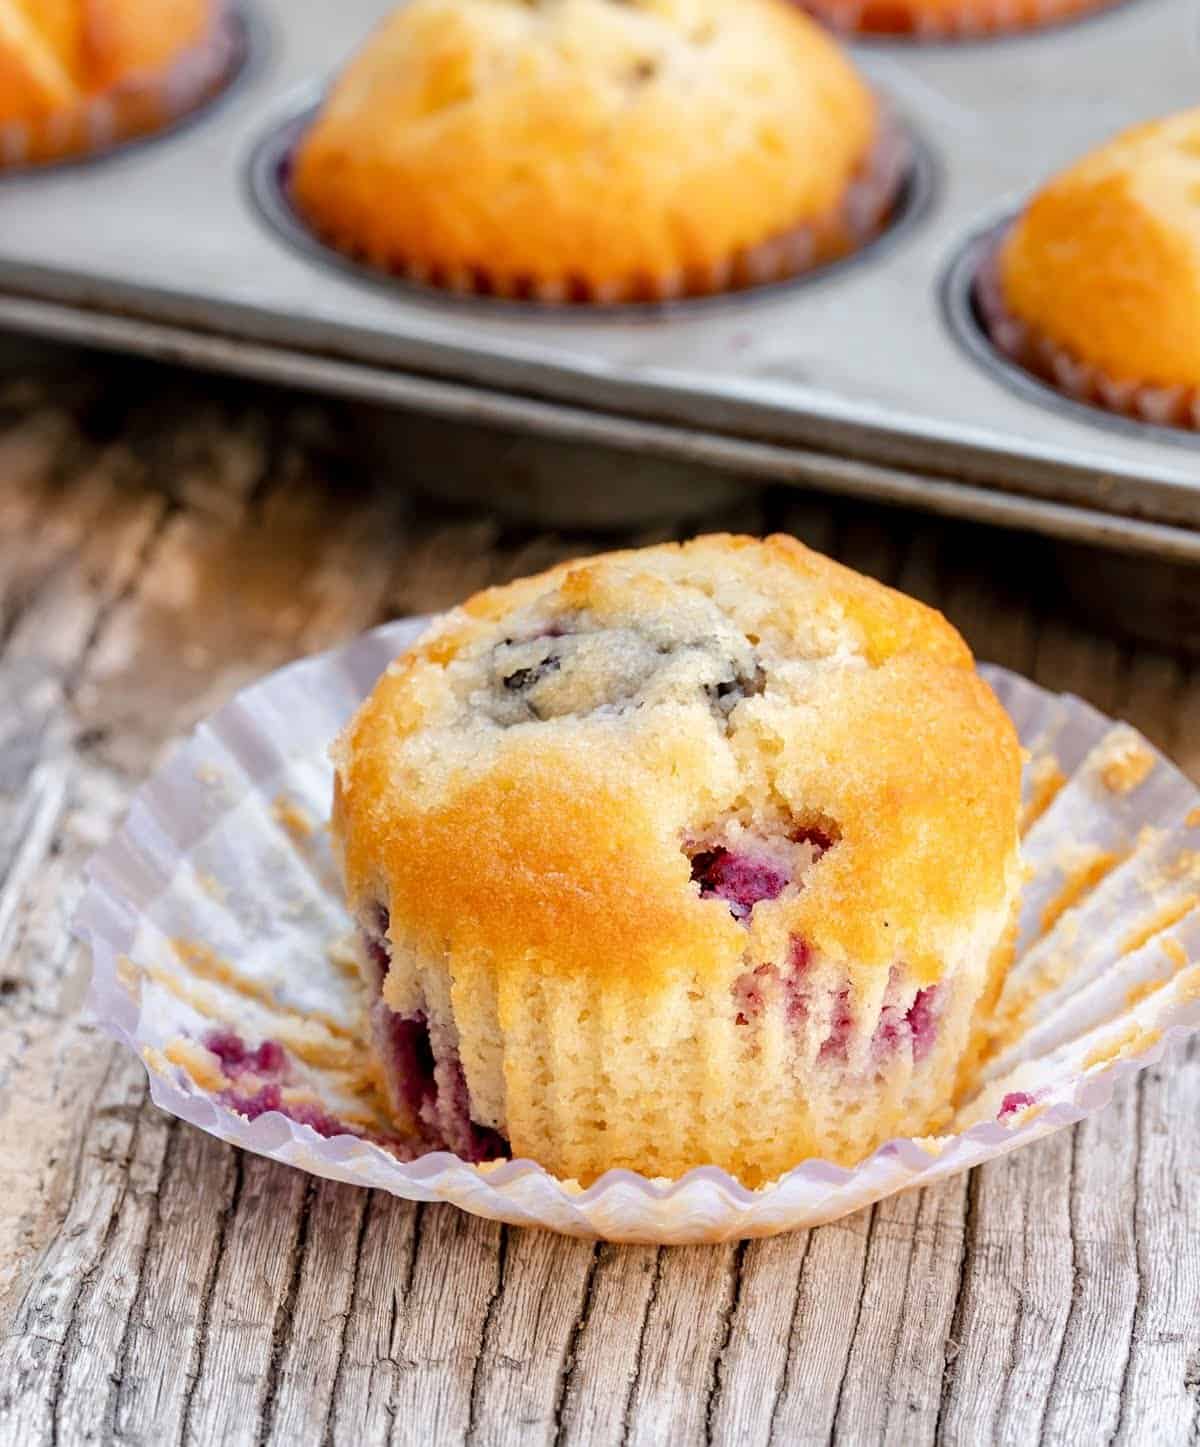 Whole blackberry muffin in opened paper liner on greyish wooden surface; pan of muffins in background.